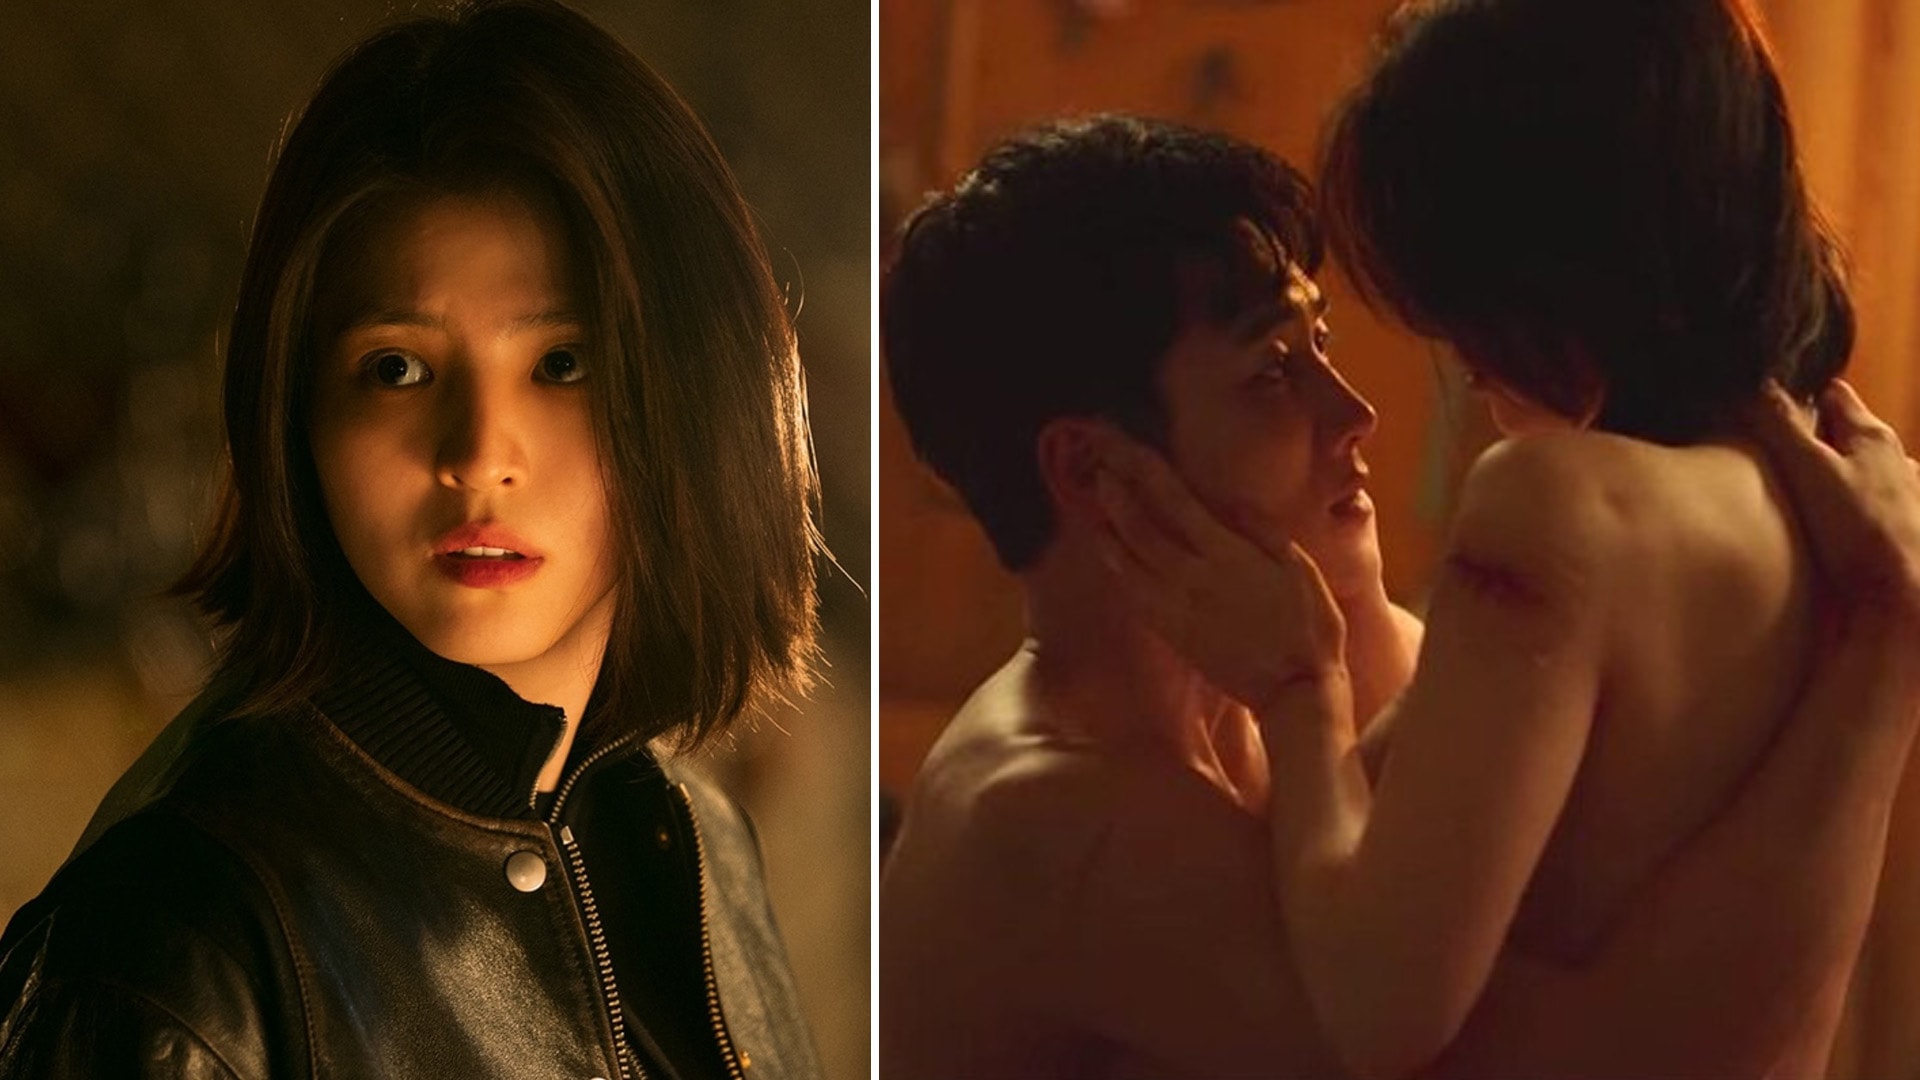 Korean Star Han So Hee Who Said She Didn’t Know She Had To Shoot A Topless Sex Scene In Netflix